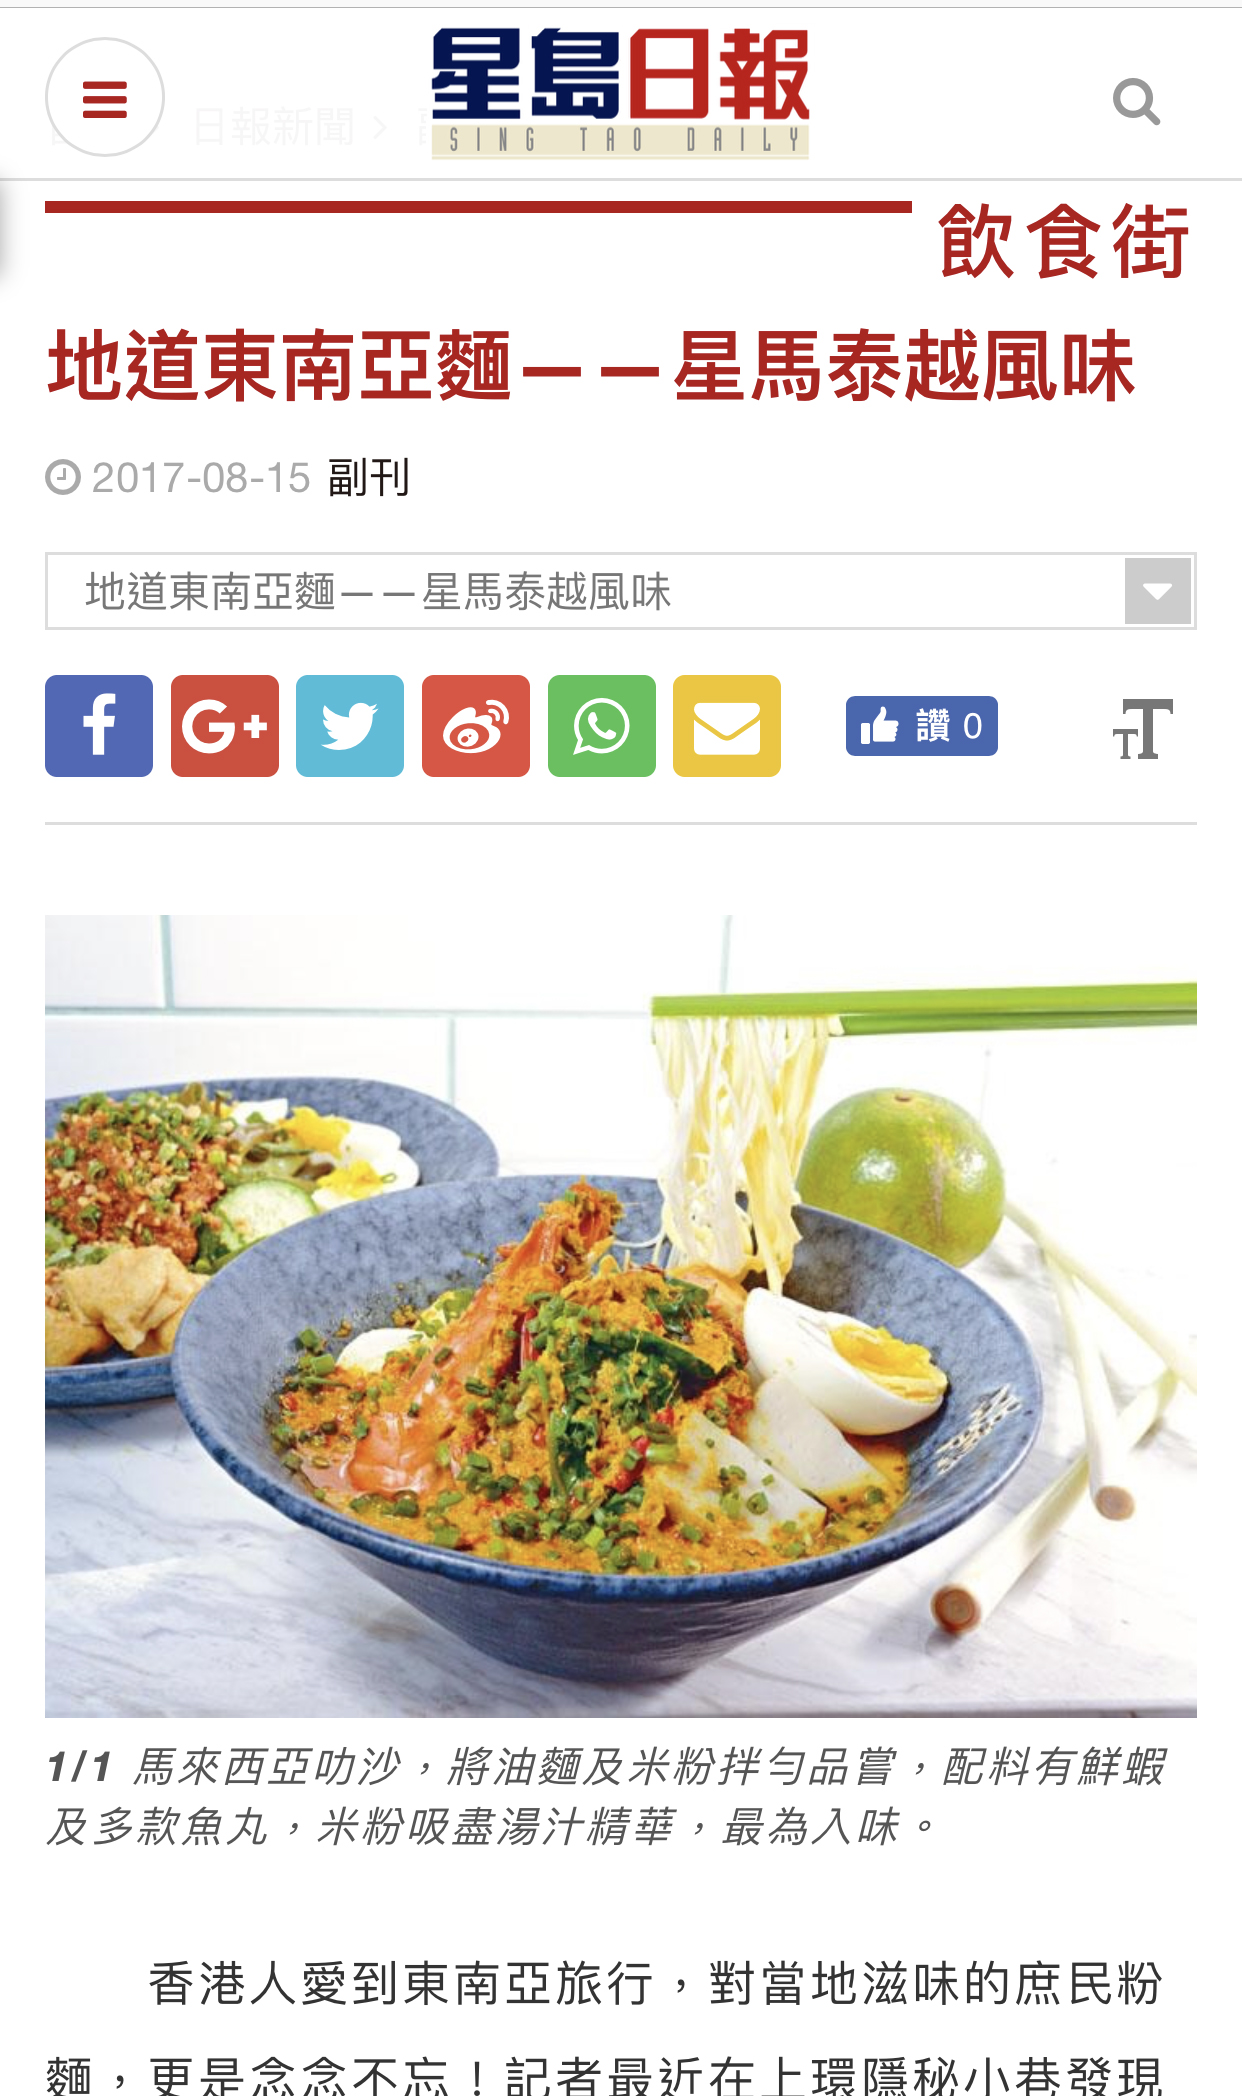 Mean Noodles on Sing Tao Daily 地道東南亞麵——星馬泰越風味